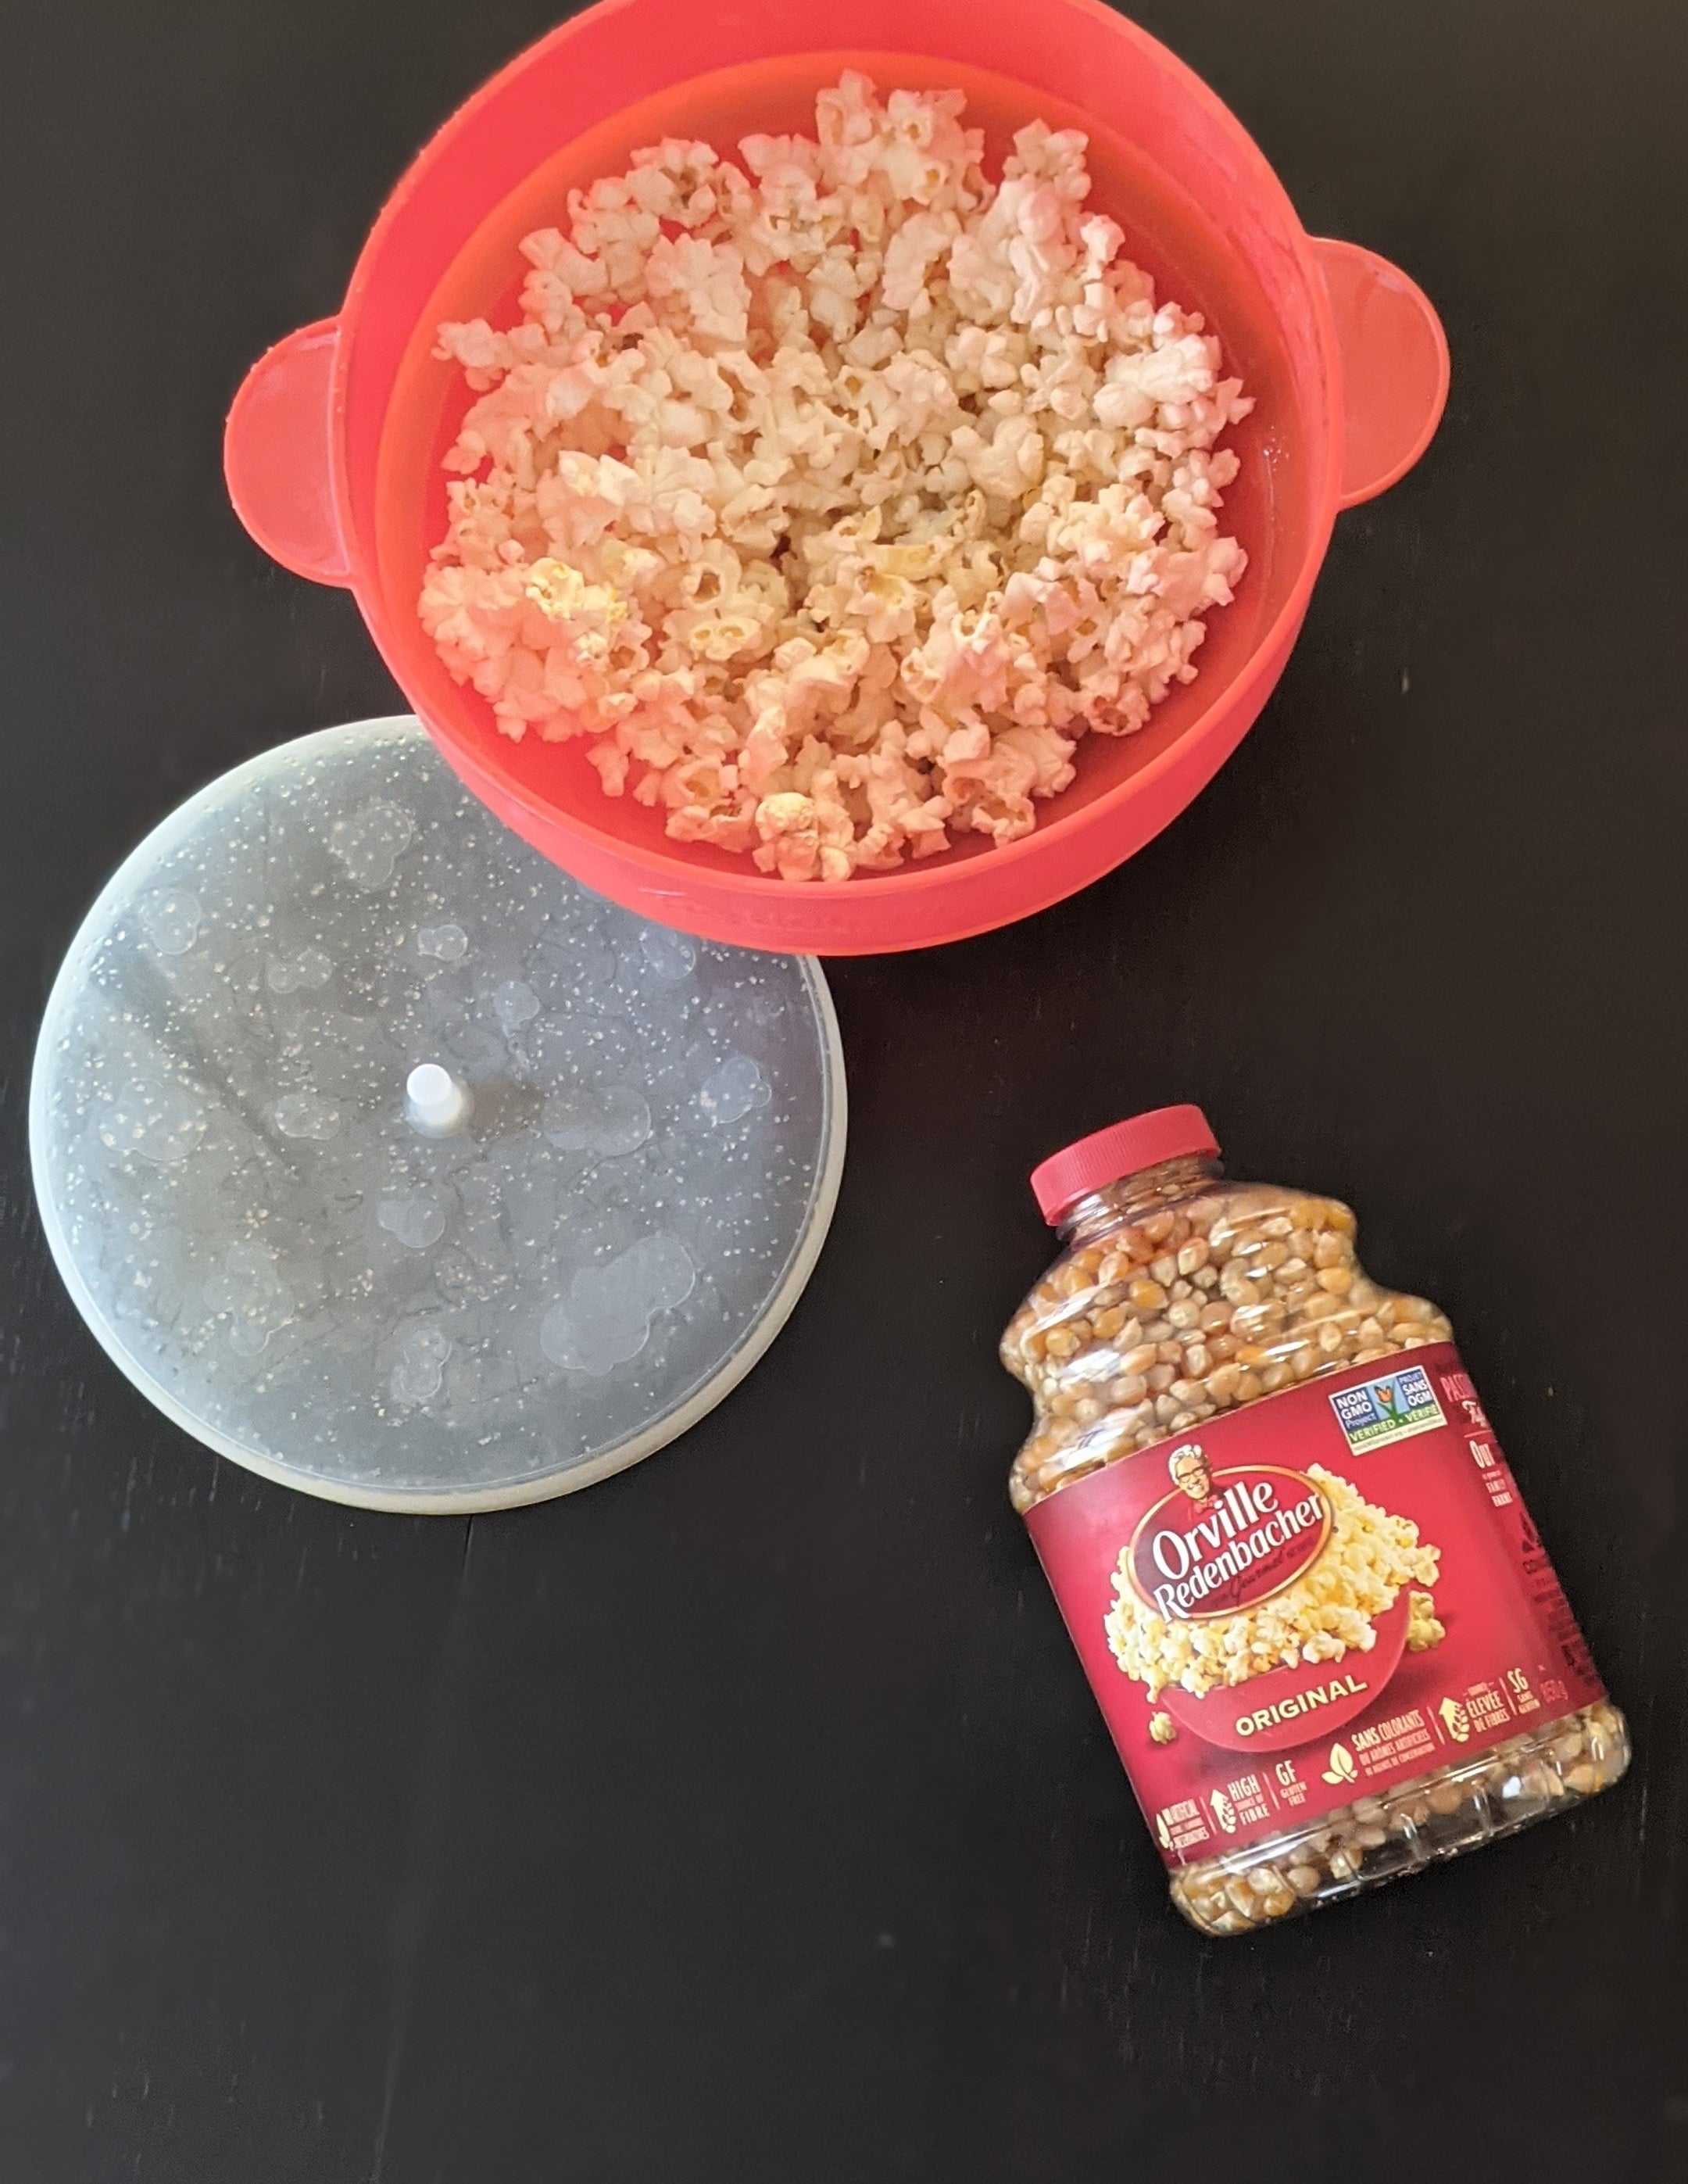 The silicone popcorn maker filled with delicious looking popcorn